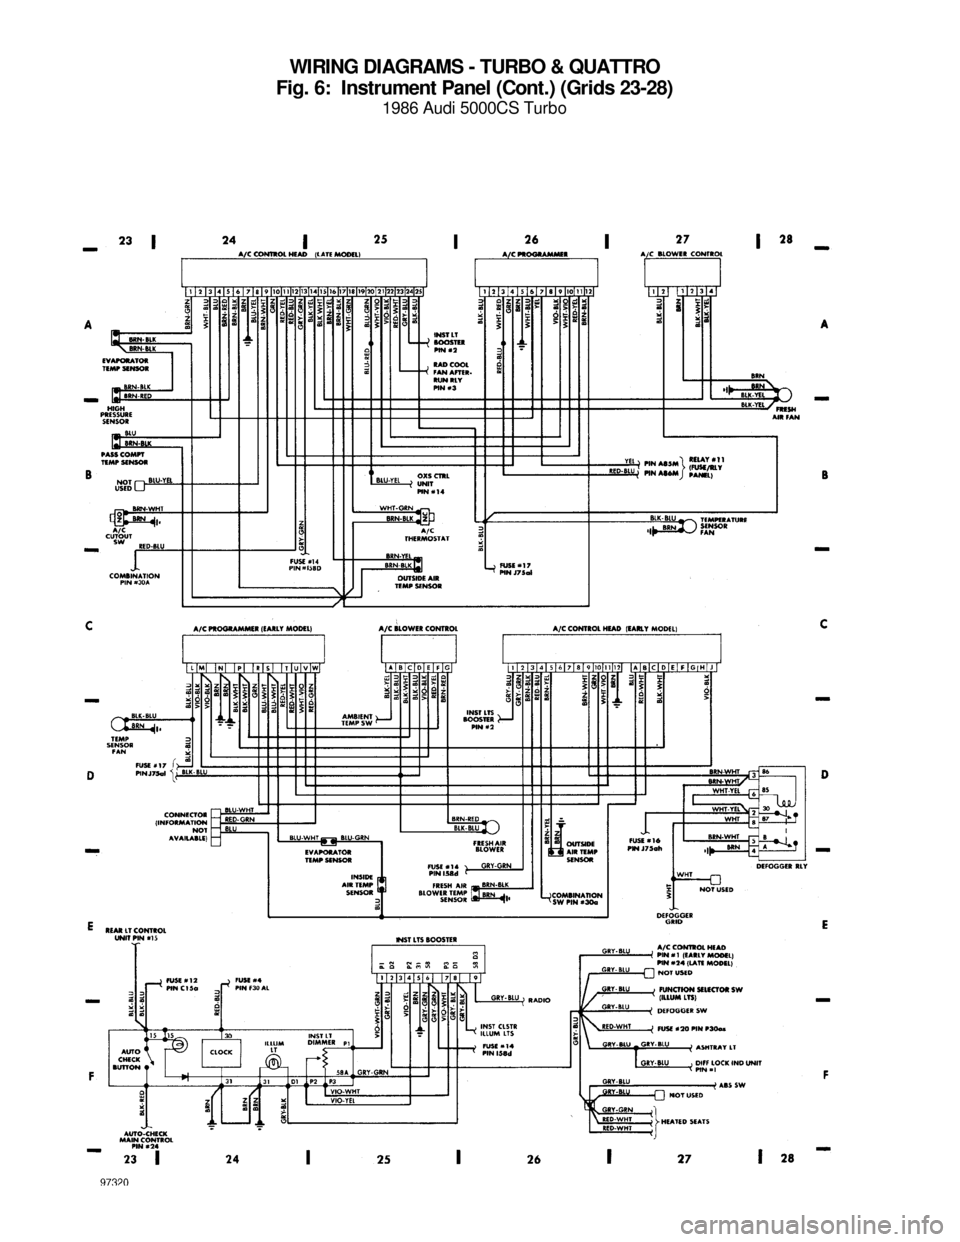 AUDI 5000CS 1986 C2 System Wiring Diagram WIRING DIAGRAMS - TURBO & QUATTRO
Fig. 6:  Instrument Panel (Cont.) (Grids 23-28)
1986 Audi 5000CS Turbo
For x    
Copyright © 1998 Mitchell Repair Information Company, LLCMonday, July 19, 2004  05:5